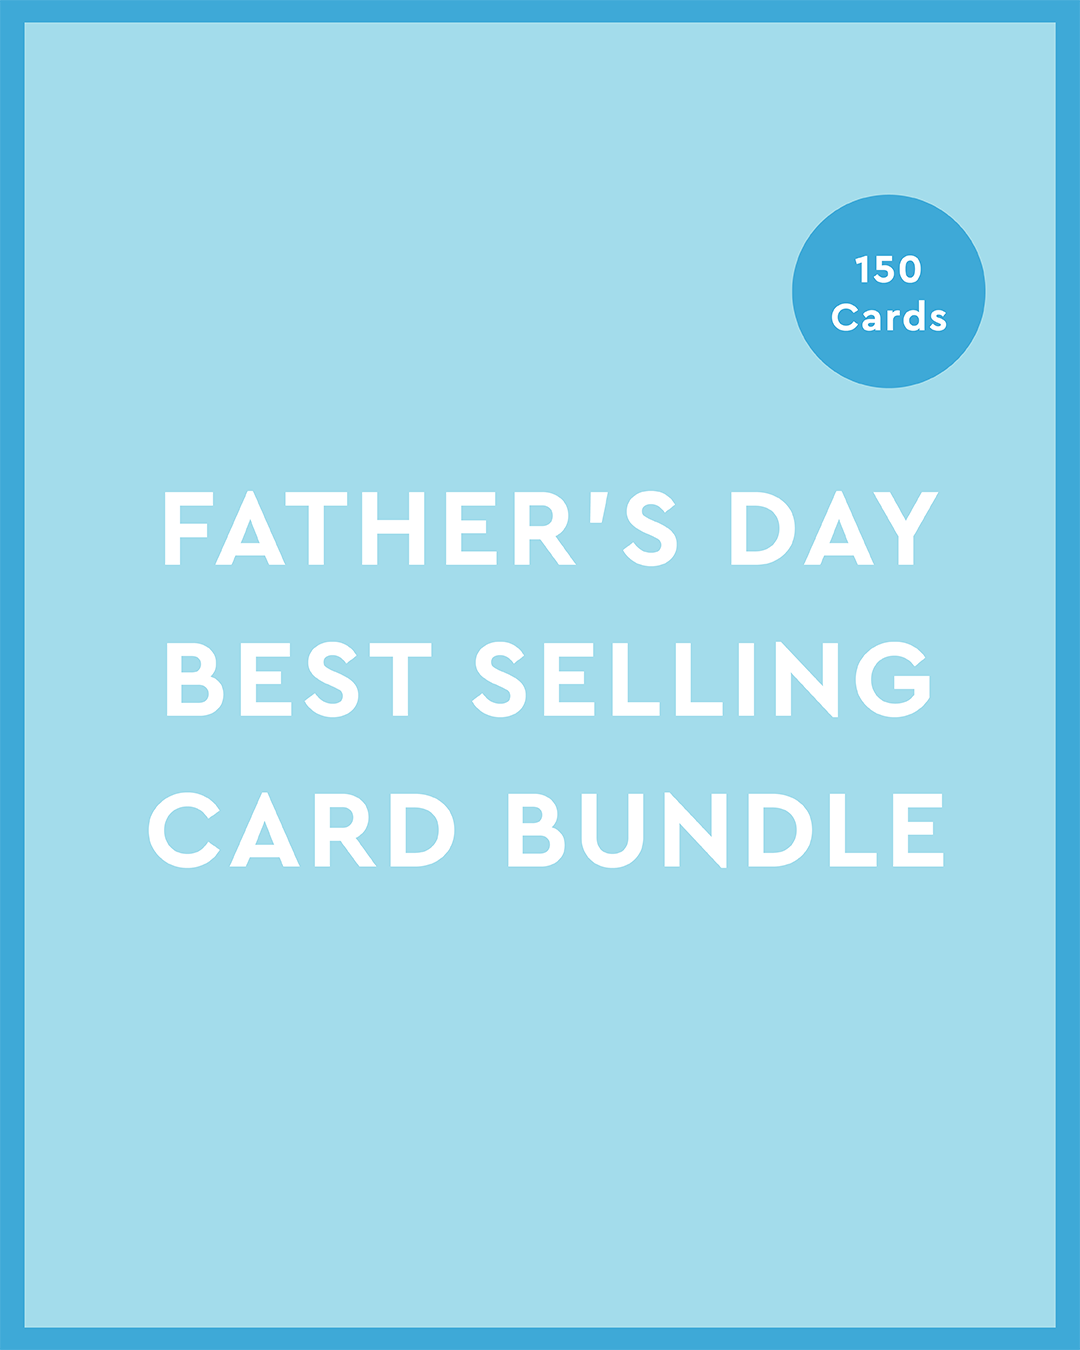 Father's Day Best Selling Card Bundle